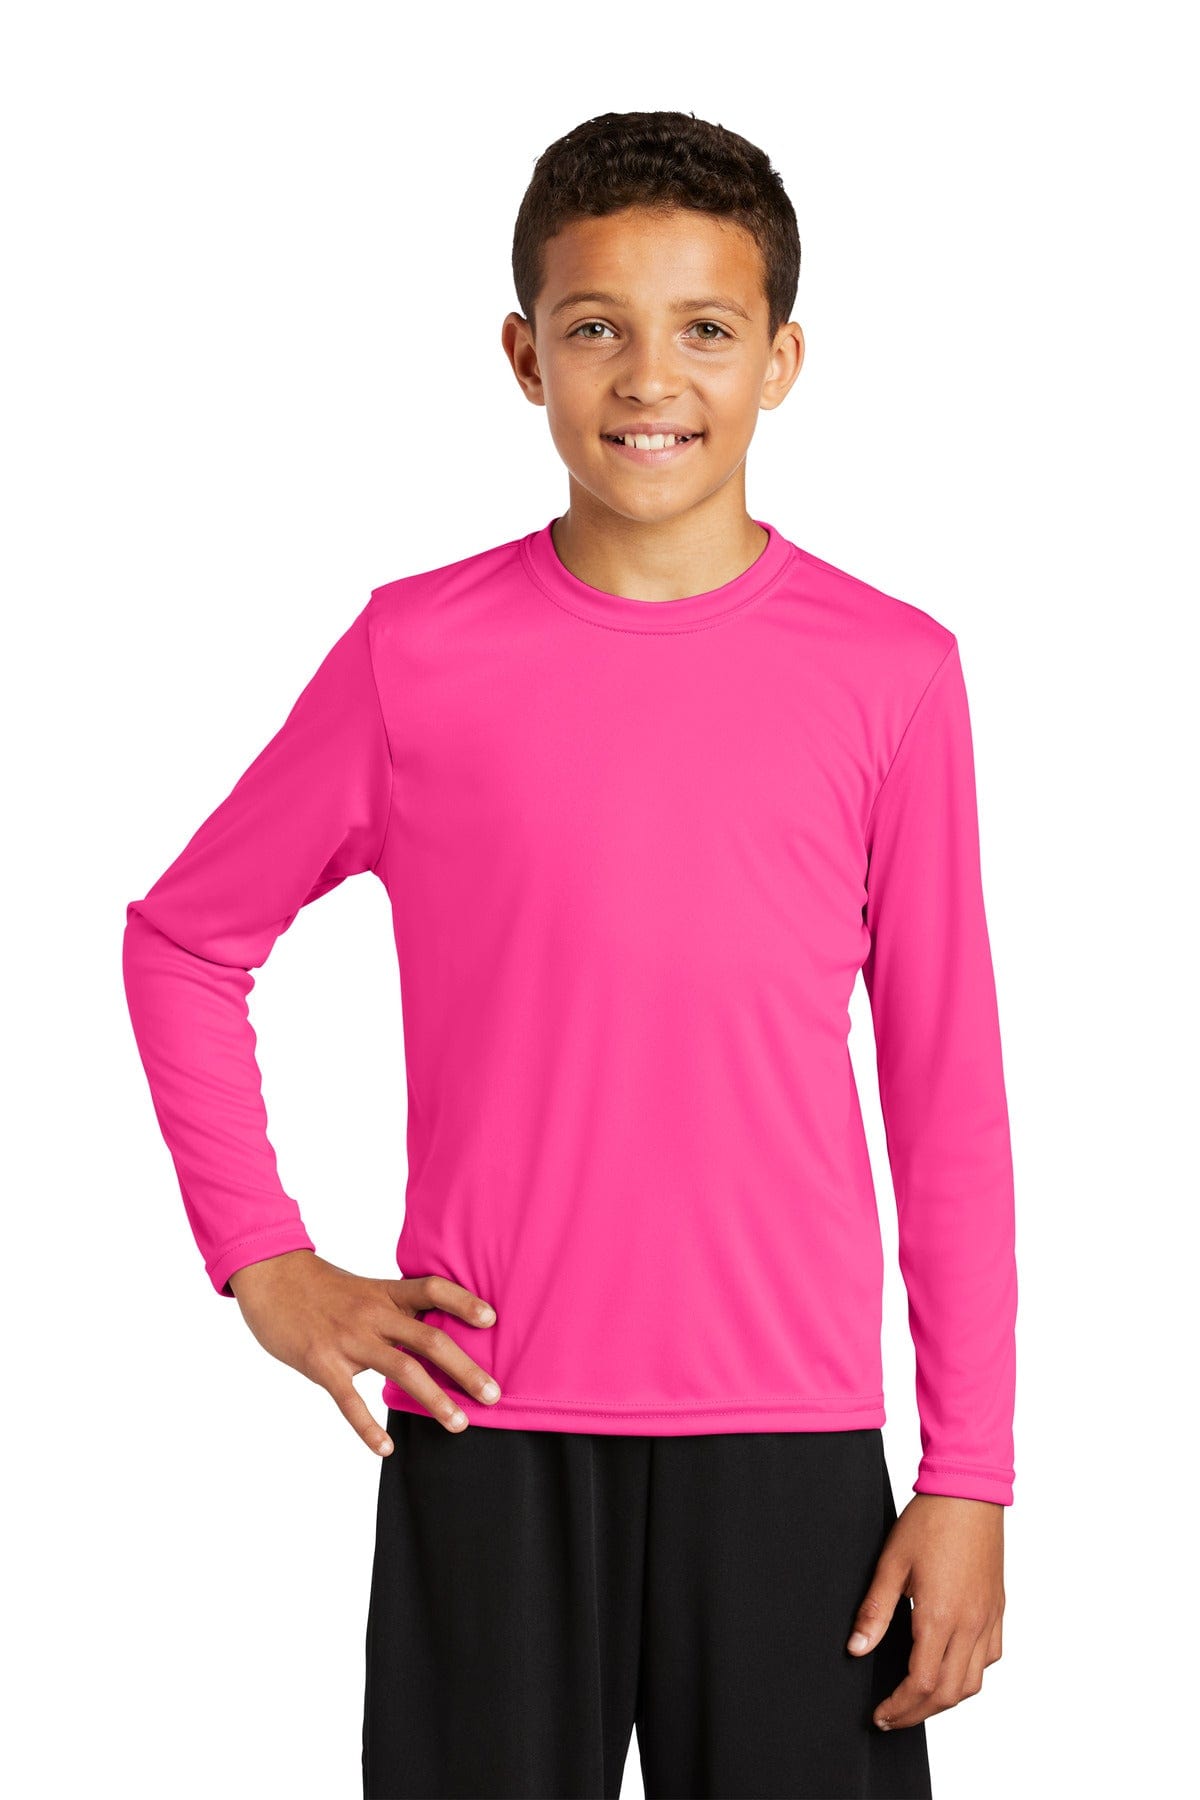 Sport-Tek ® Youth Long Sleeve PosiCharge ® Competitor™ Tee. YST350LS, Basic Colors